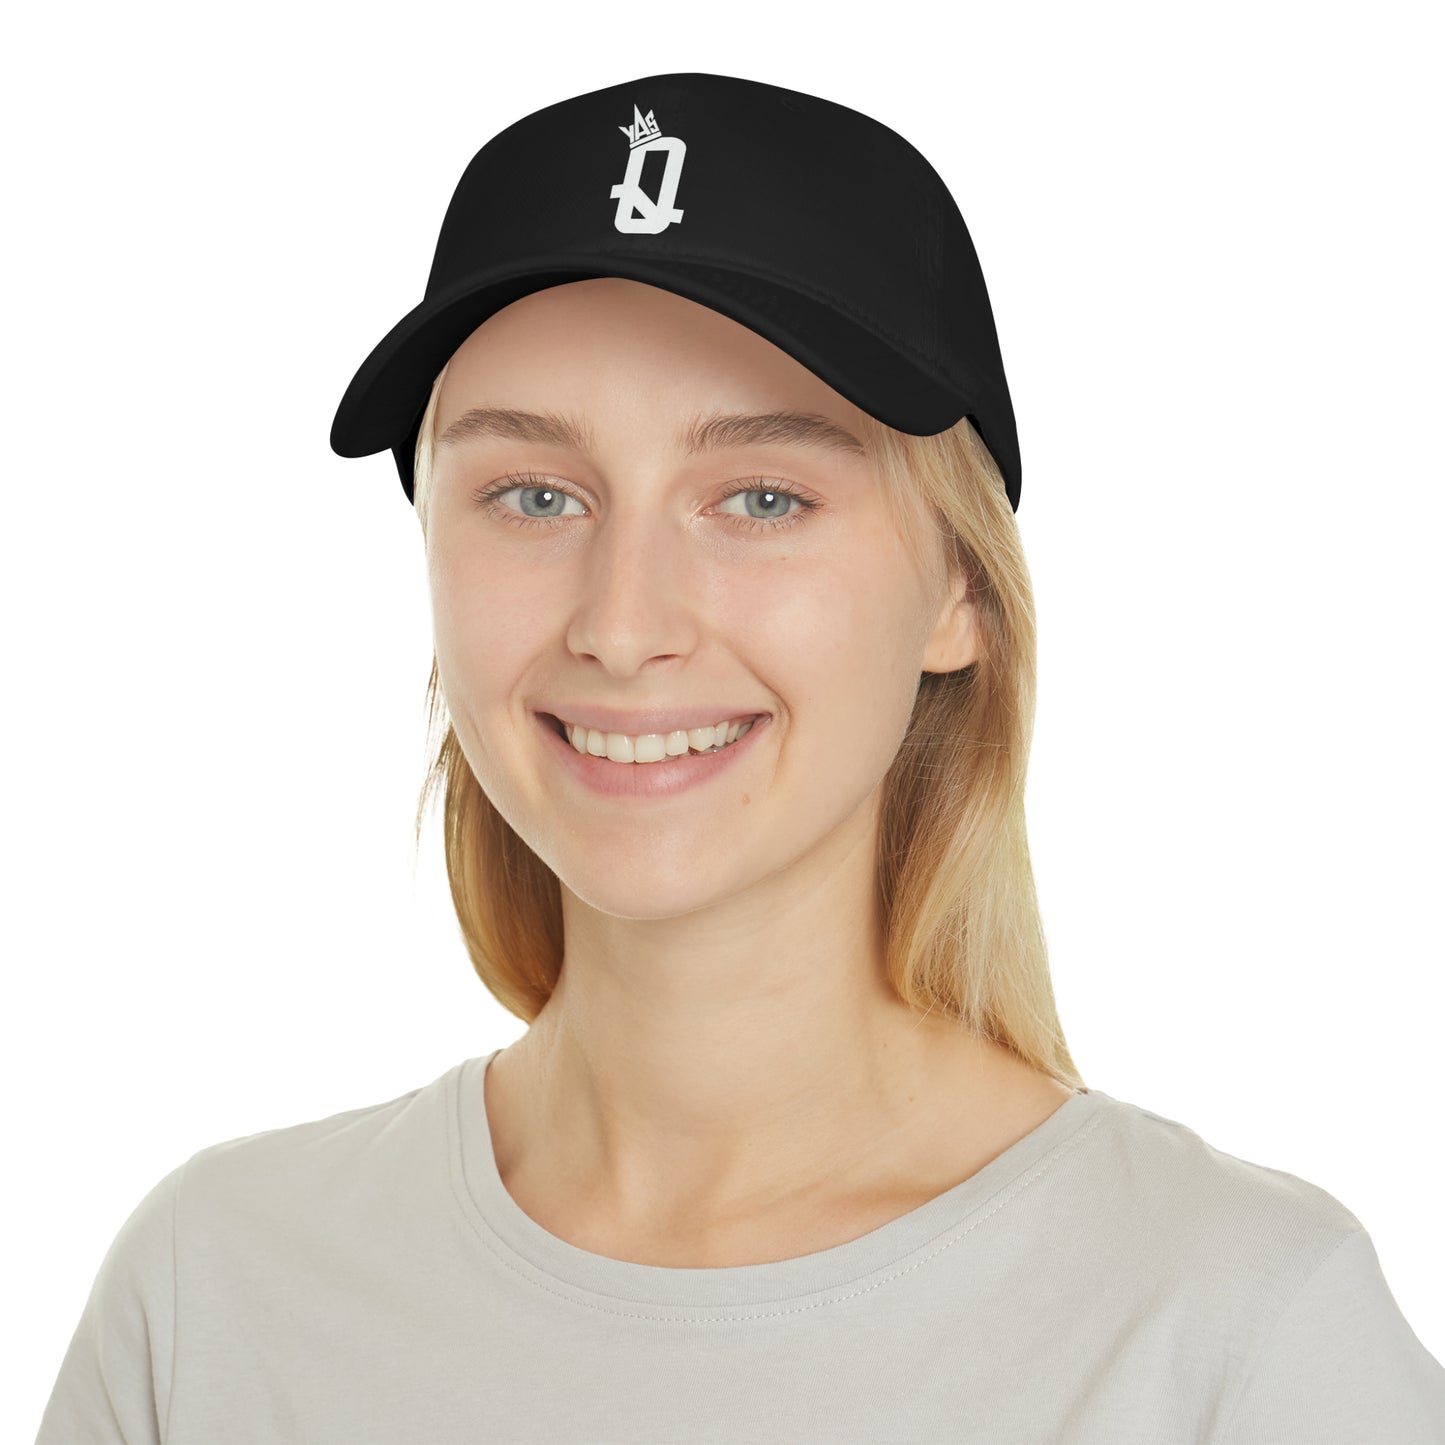 Crown Your Success: YAS Q (You Aspire Success Queen) Baseball Cap Collection - Reign in Style with Confidence!